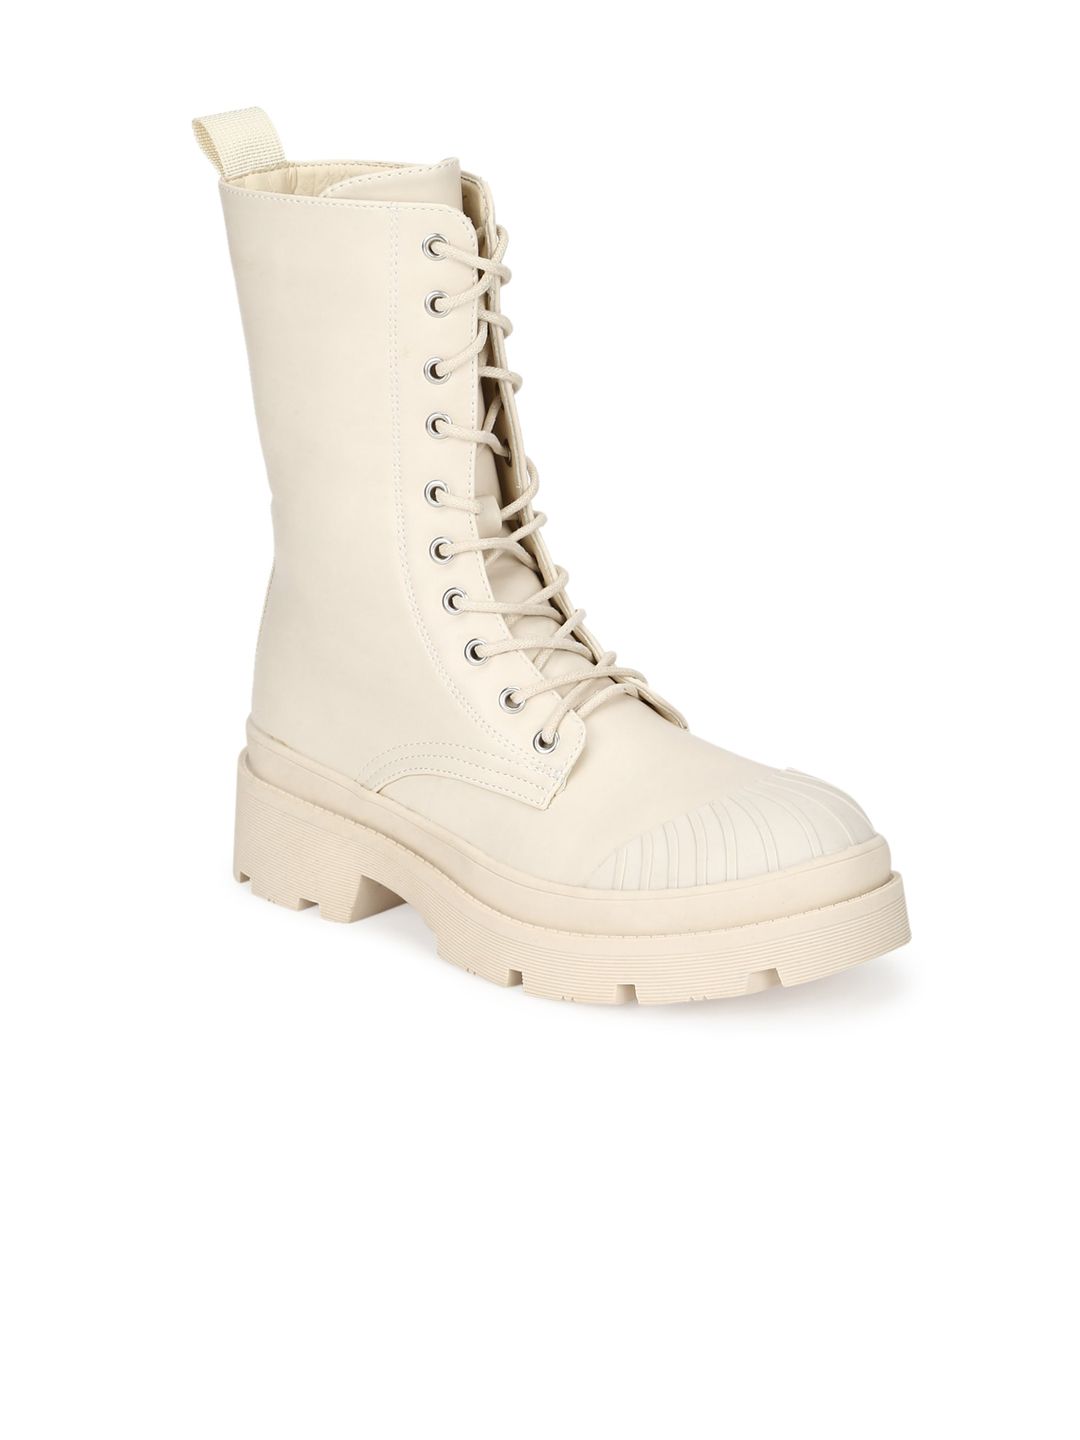 Truffle Collection Off White PU High-Top Platform Heeled Boots Price in India